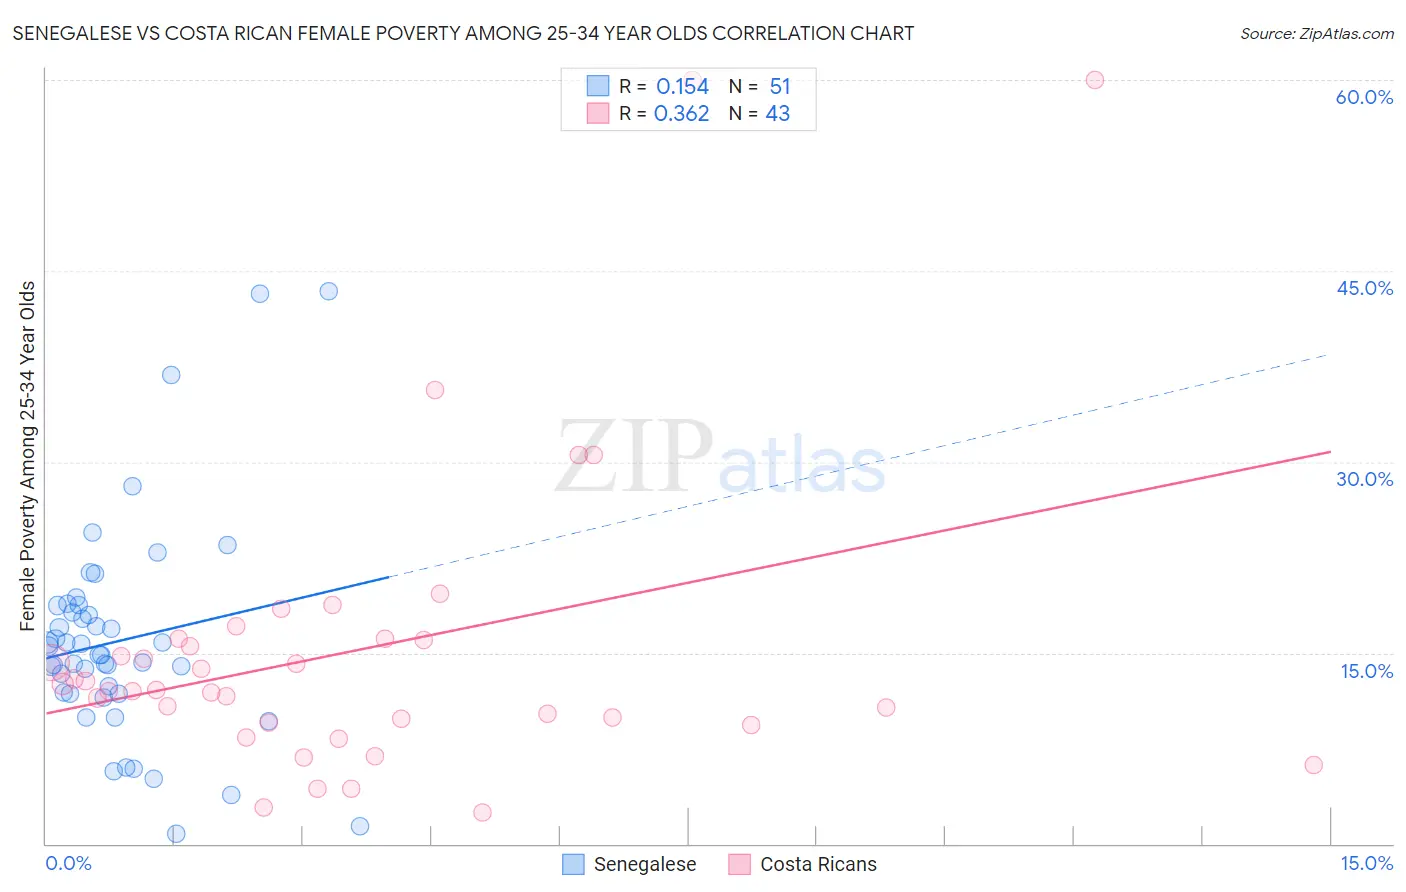 Senegalese vs Costa Rican Female Poverty Among 25-34 Year Olds